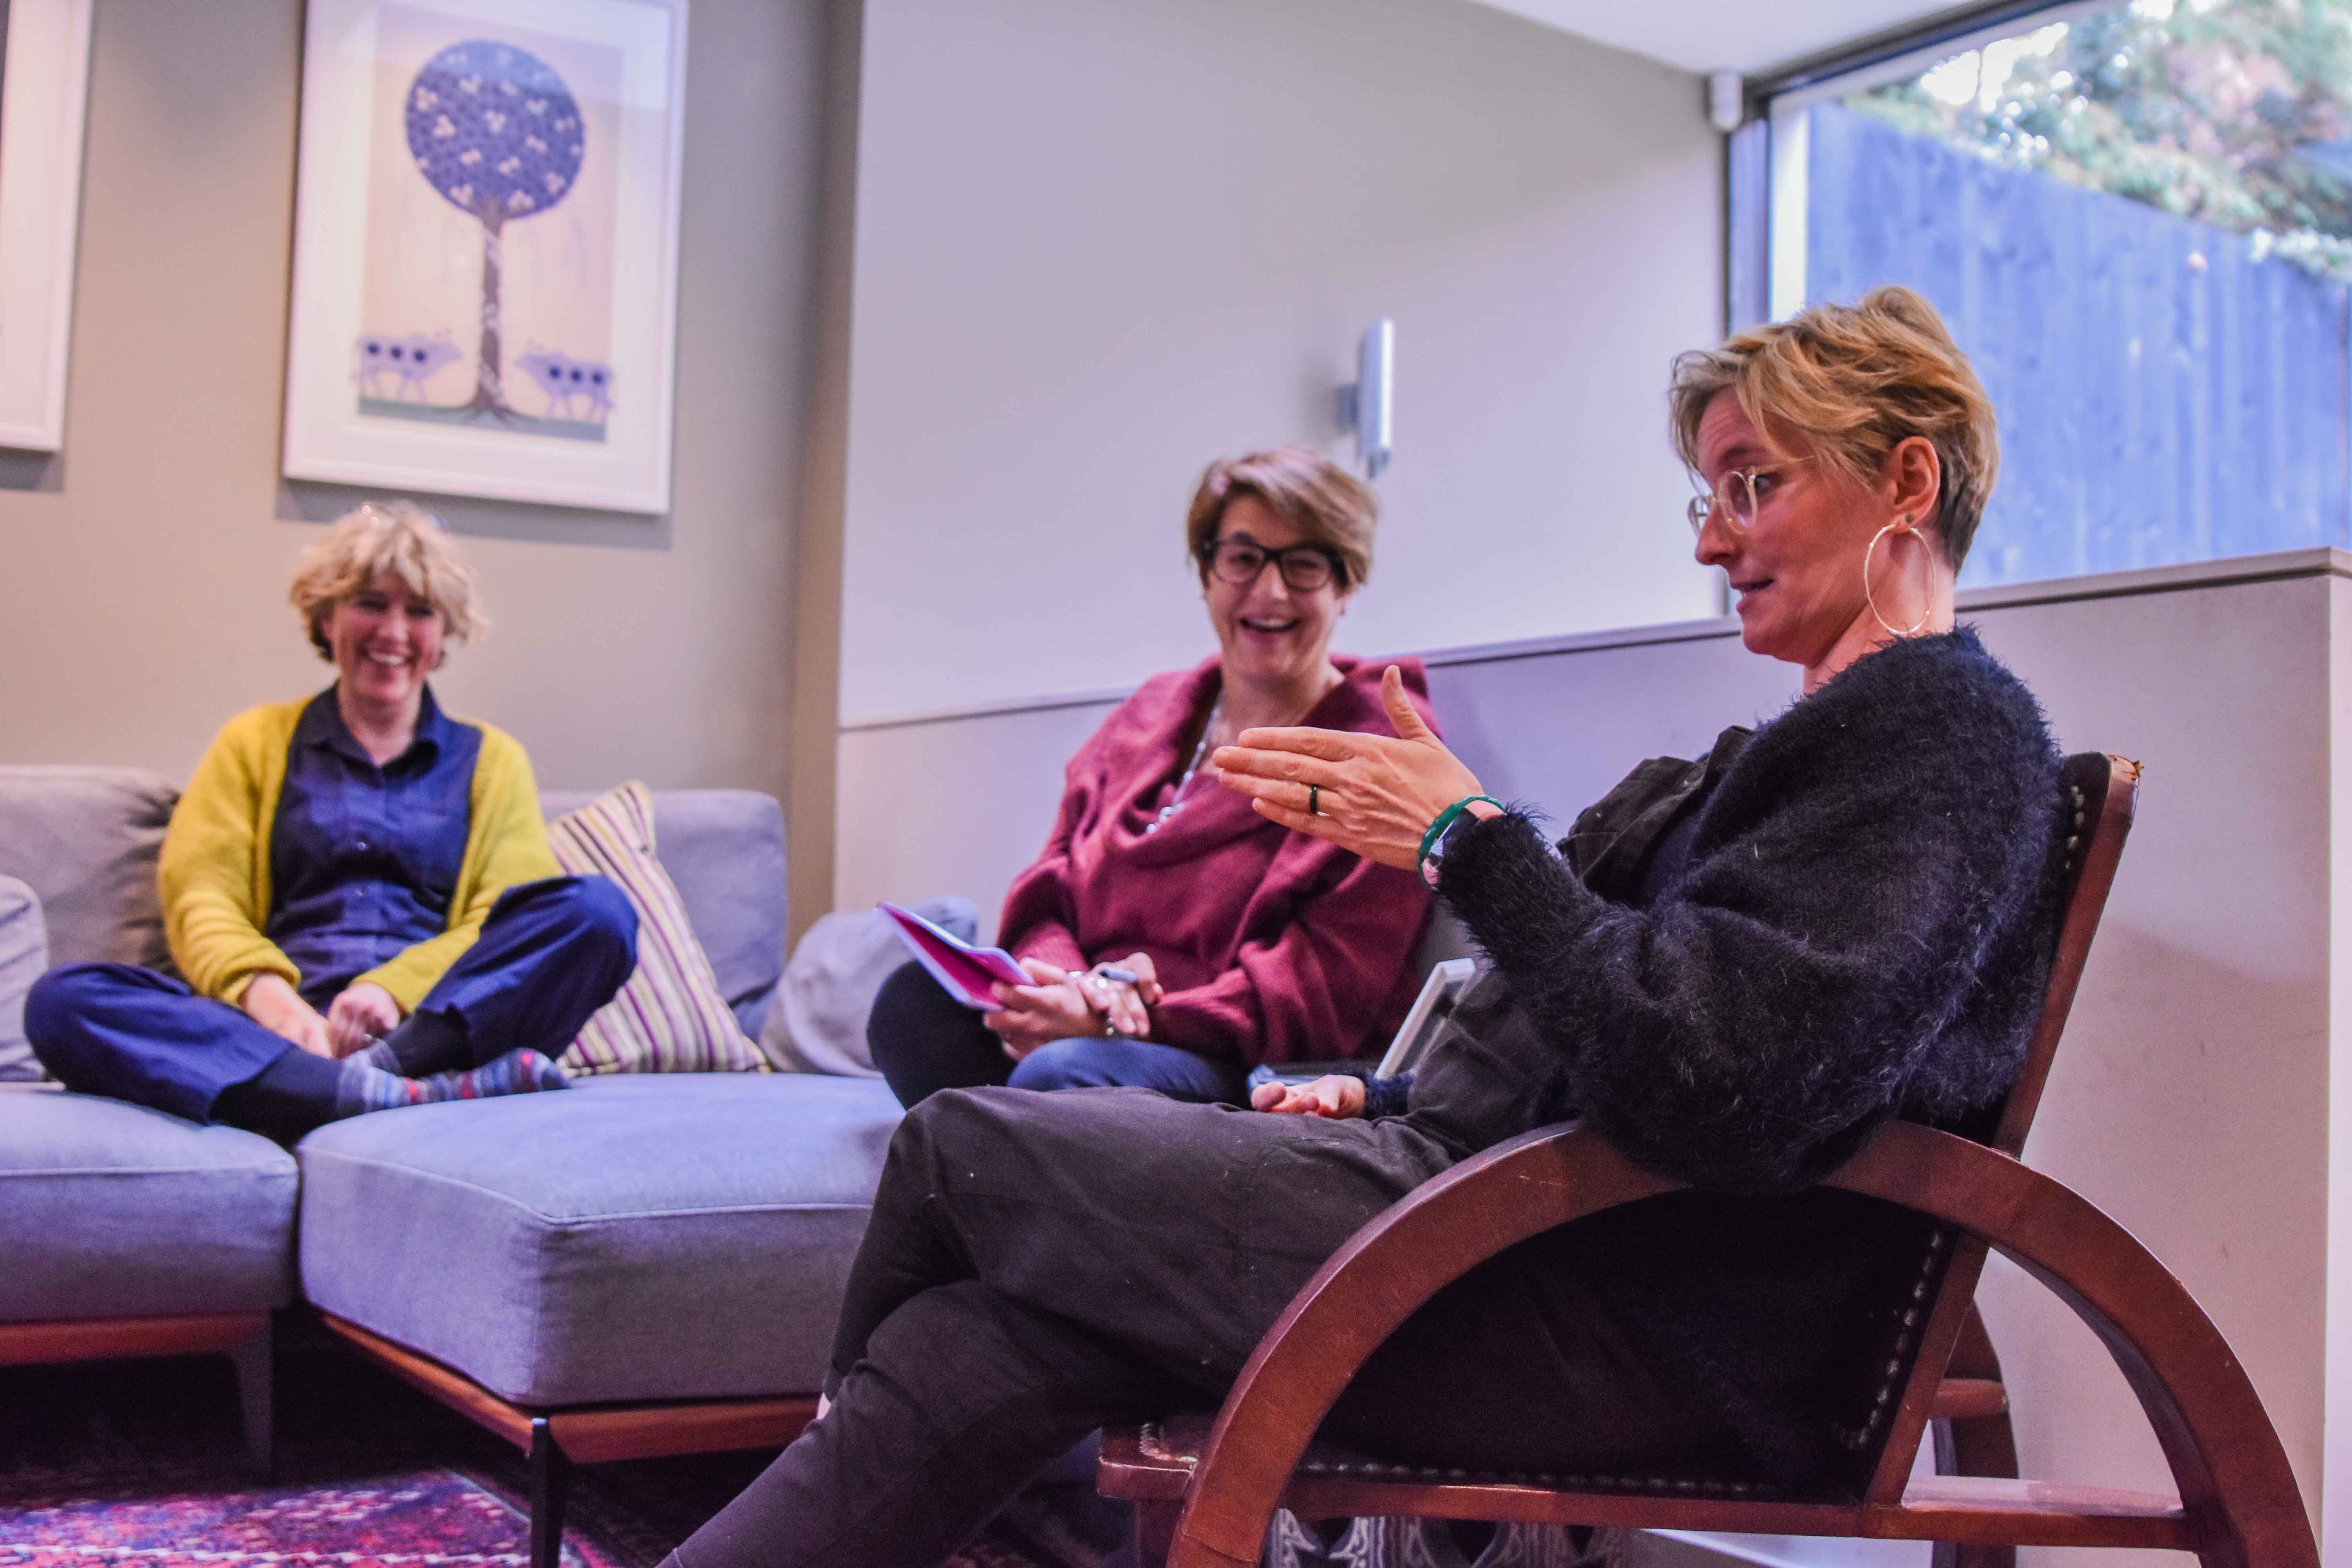 3 women in discussion in a living room, Claire Hodgson the show creator with her hands joined in support of what she is expressing while the other two are laughing